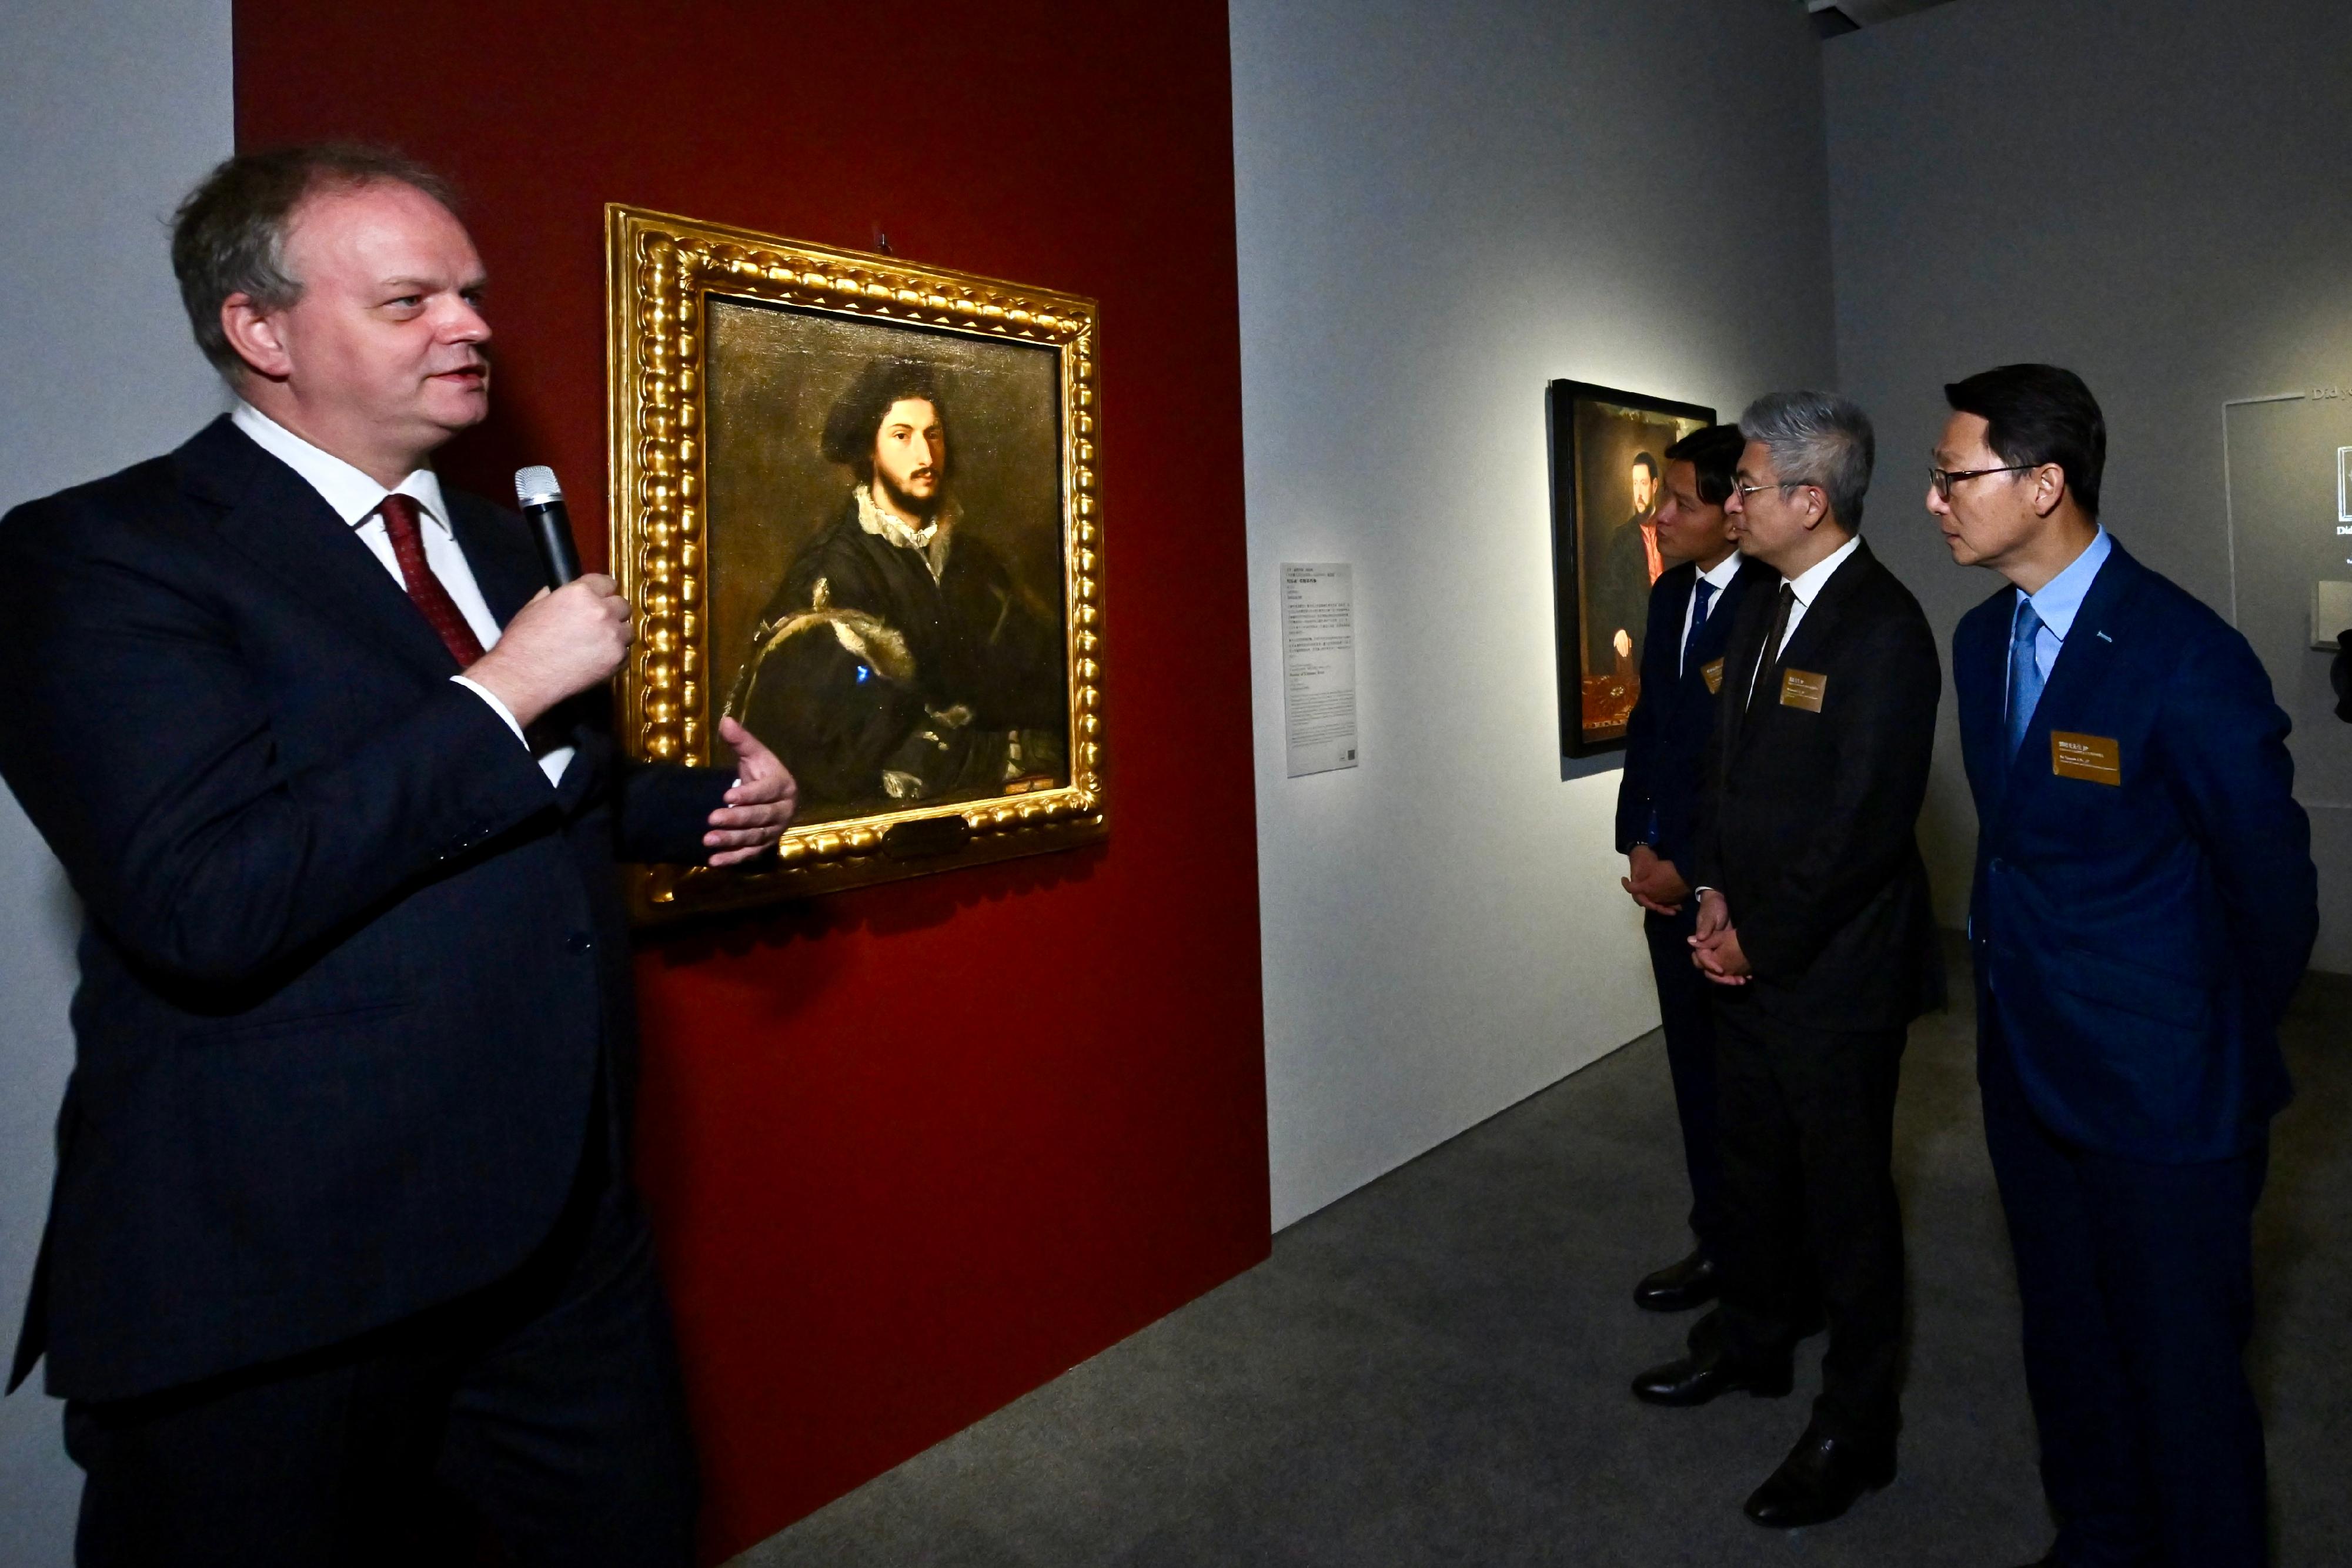 The opening ceremony of "The Hong Kong Jockey Club Series: Titian and the Venetian Renaissance from the Uffizi" exhibition was held at the Hong Kong Museum of Art yesterday (November 2). Picture shows officiating guests (from left) the Director of the Uffizi Galleries in Italy, Professor Eike Schmidt; the Chairman of the Legislative Council Panel on Home Affairs, Culture and Sports, Mr Vincent Cheng; the Acting Secretary for Culture, Sports and Tourism, Mr Raistlin Lau; and the Director of Leisure and Cultural Services, Mr Vincent Liu, touring the exhibition.